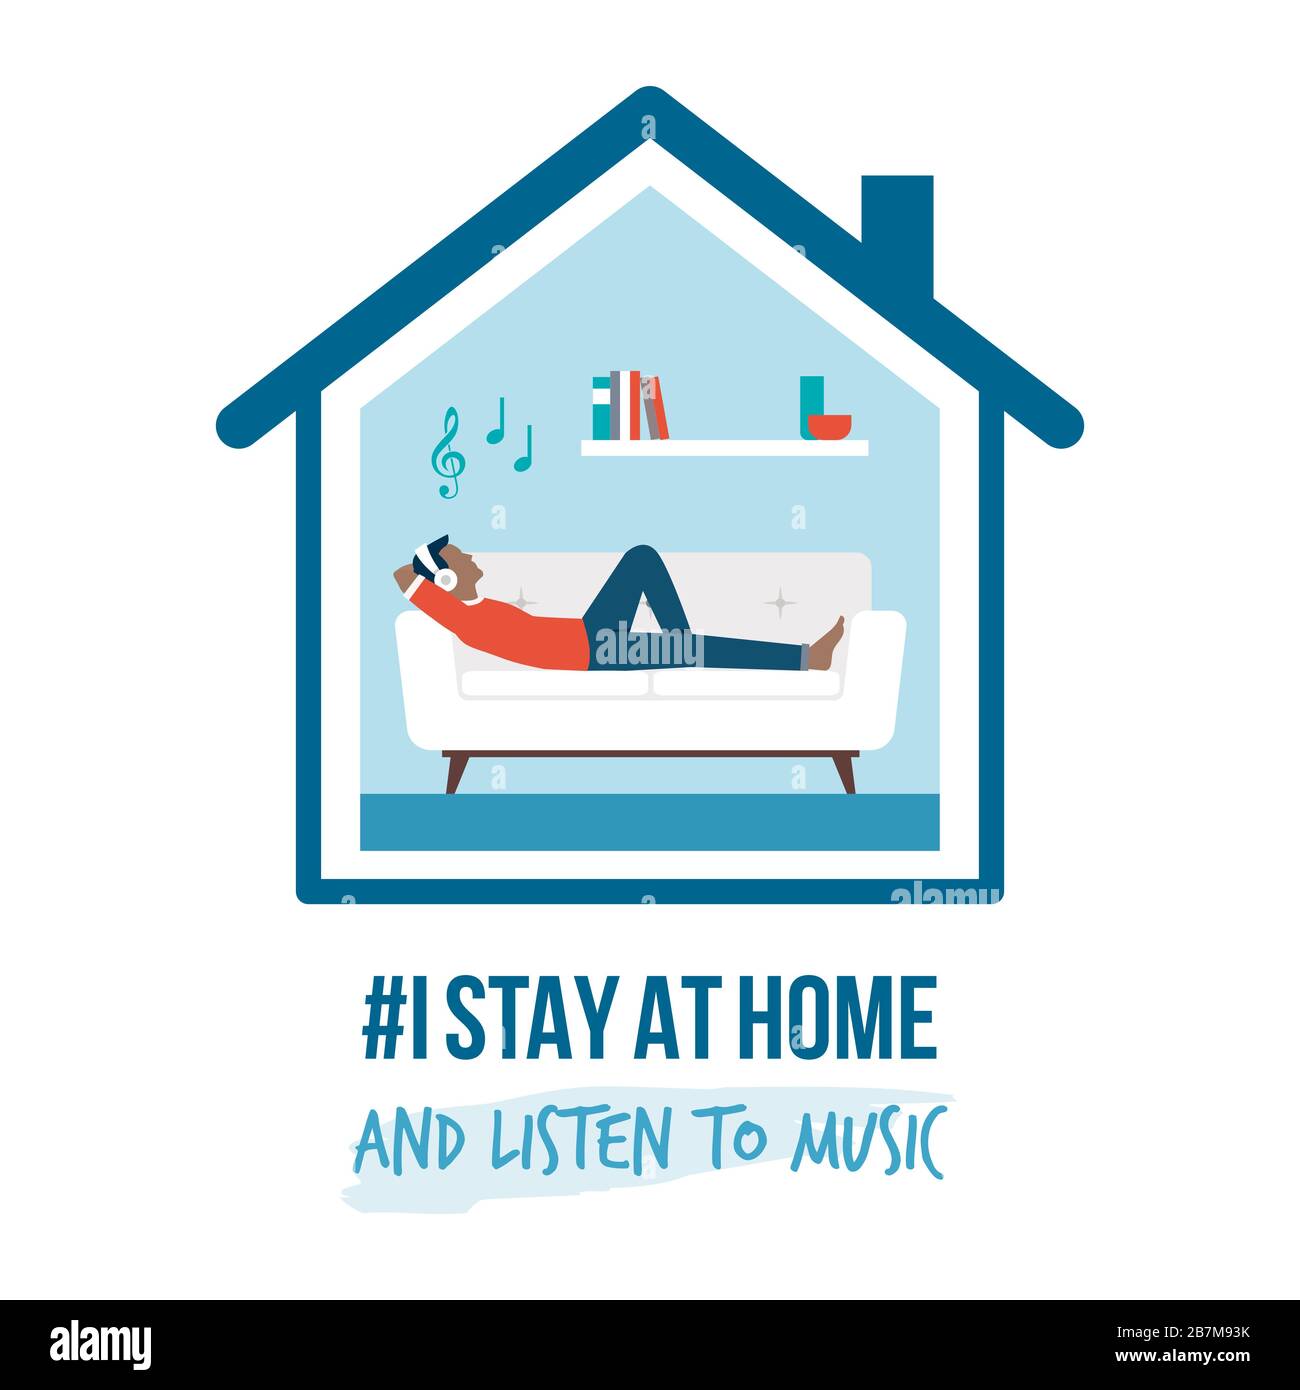 I stay at home awareness social media campaign and coronavirus prevention: man lying on the sofa and listening to music Stock Vector